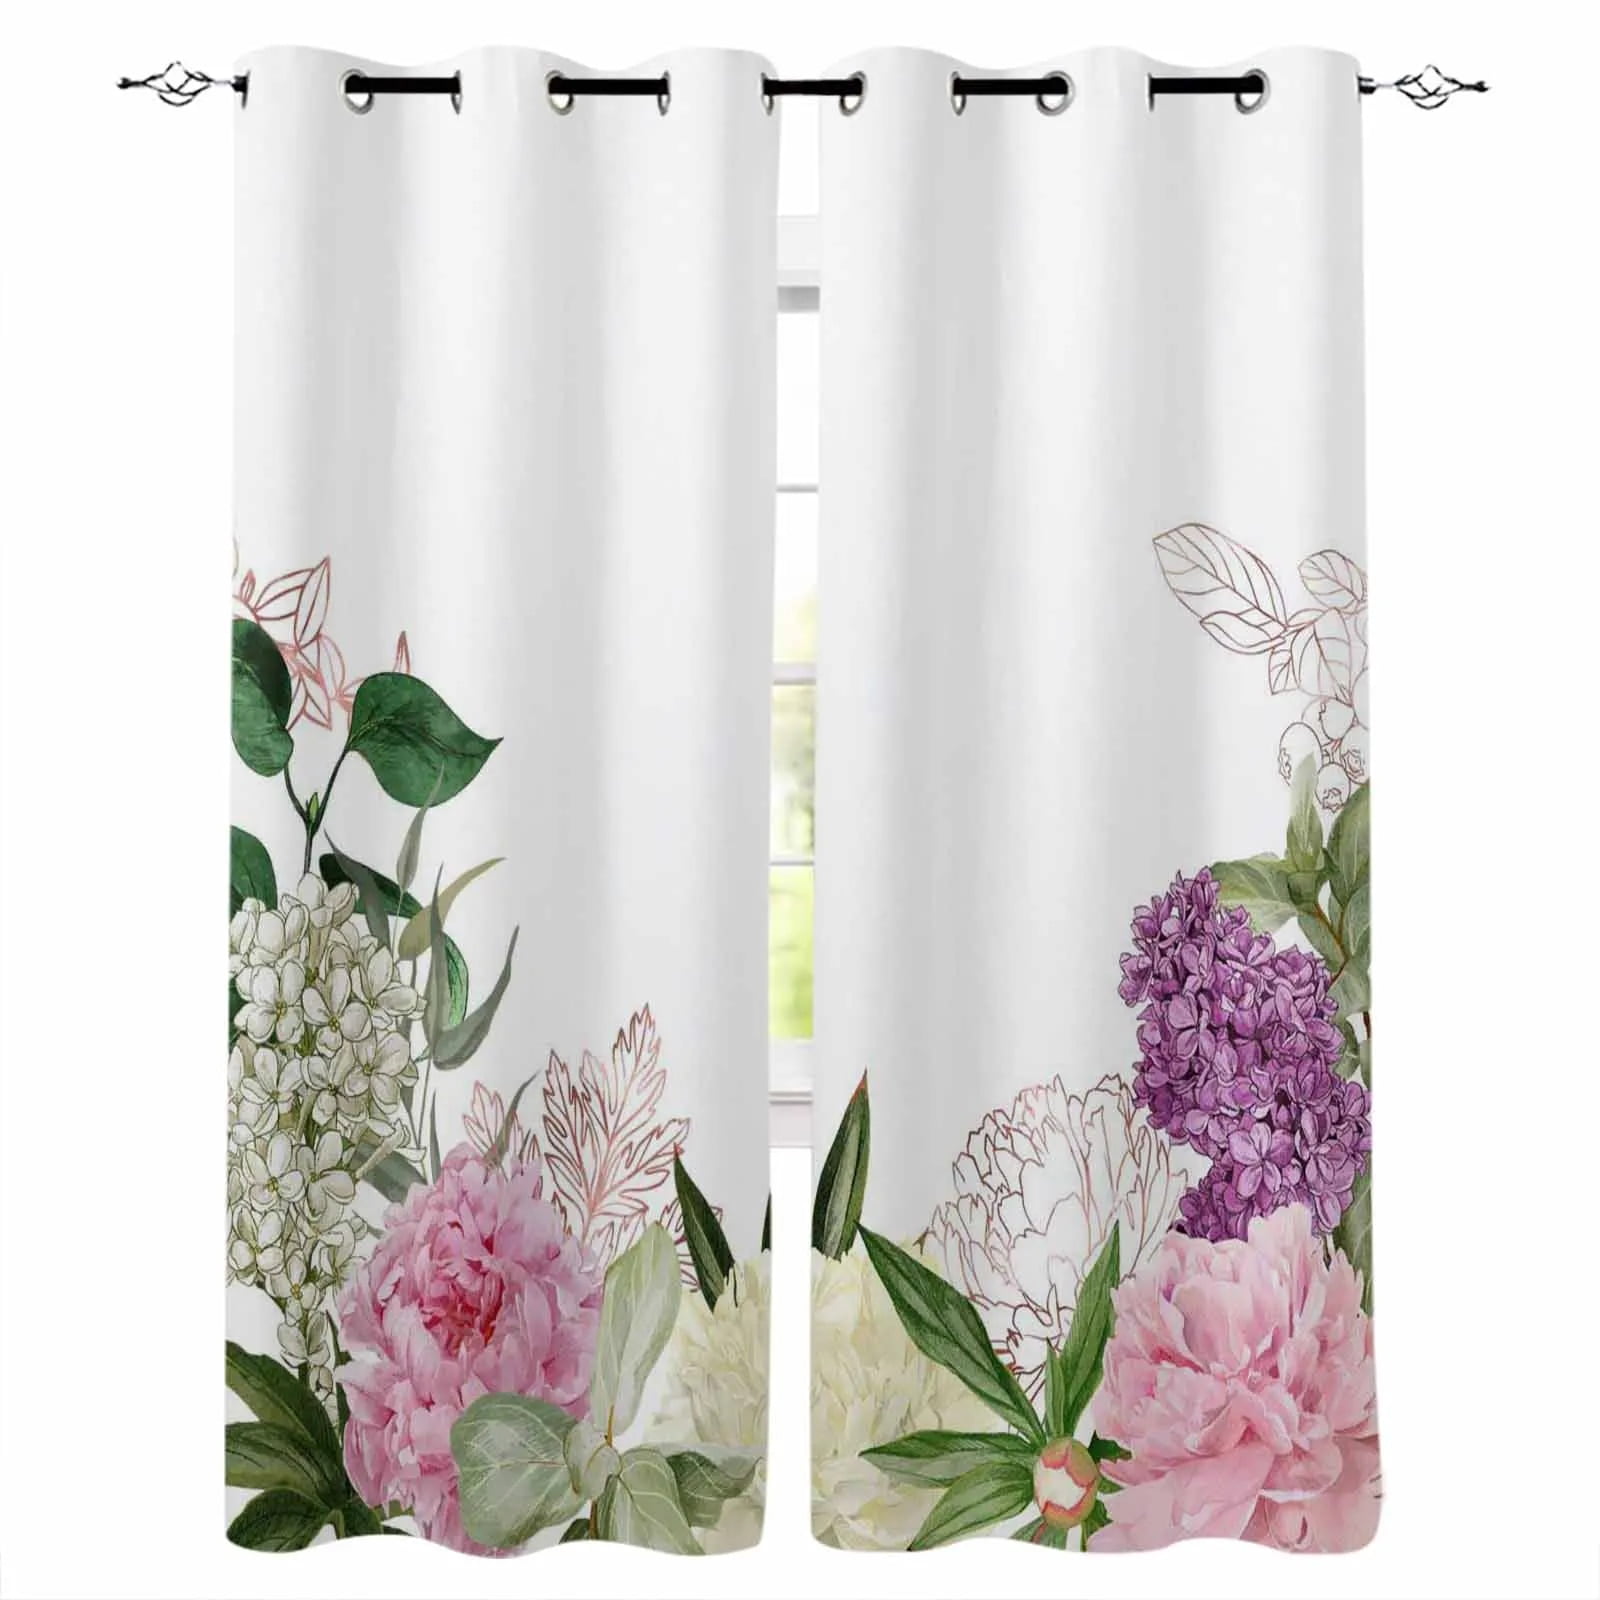 Red Rose Flower Black Curtains For Living Room Bedroom Window Treatment ...